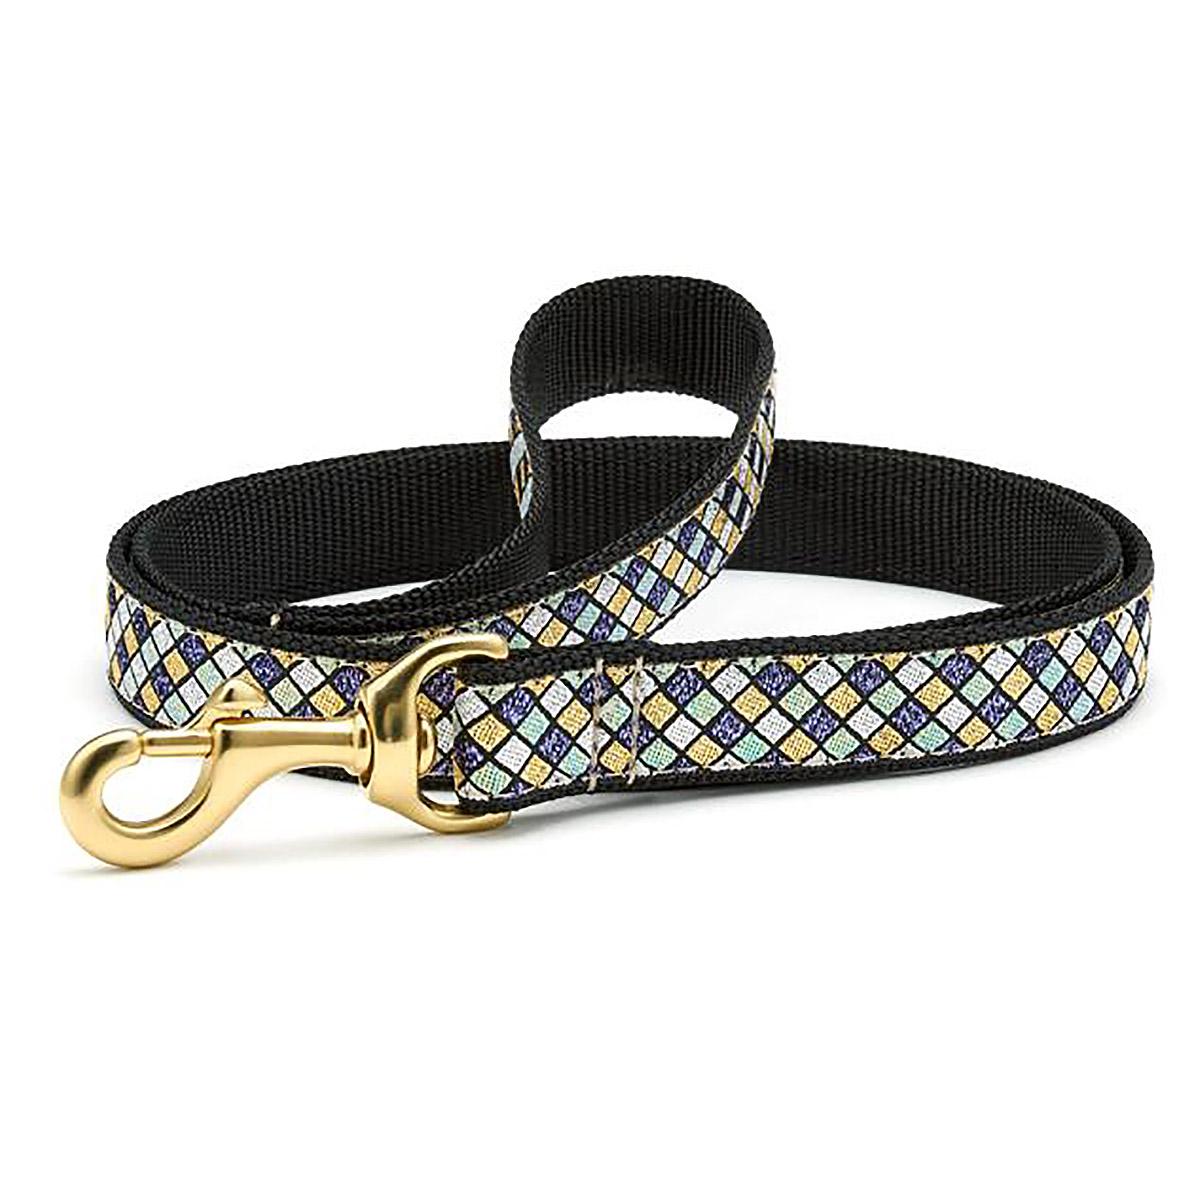 Glitter Dog Leash by Up Country